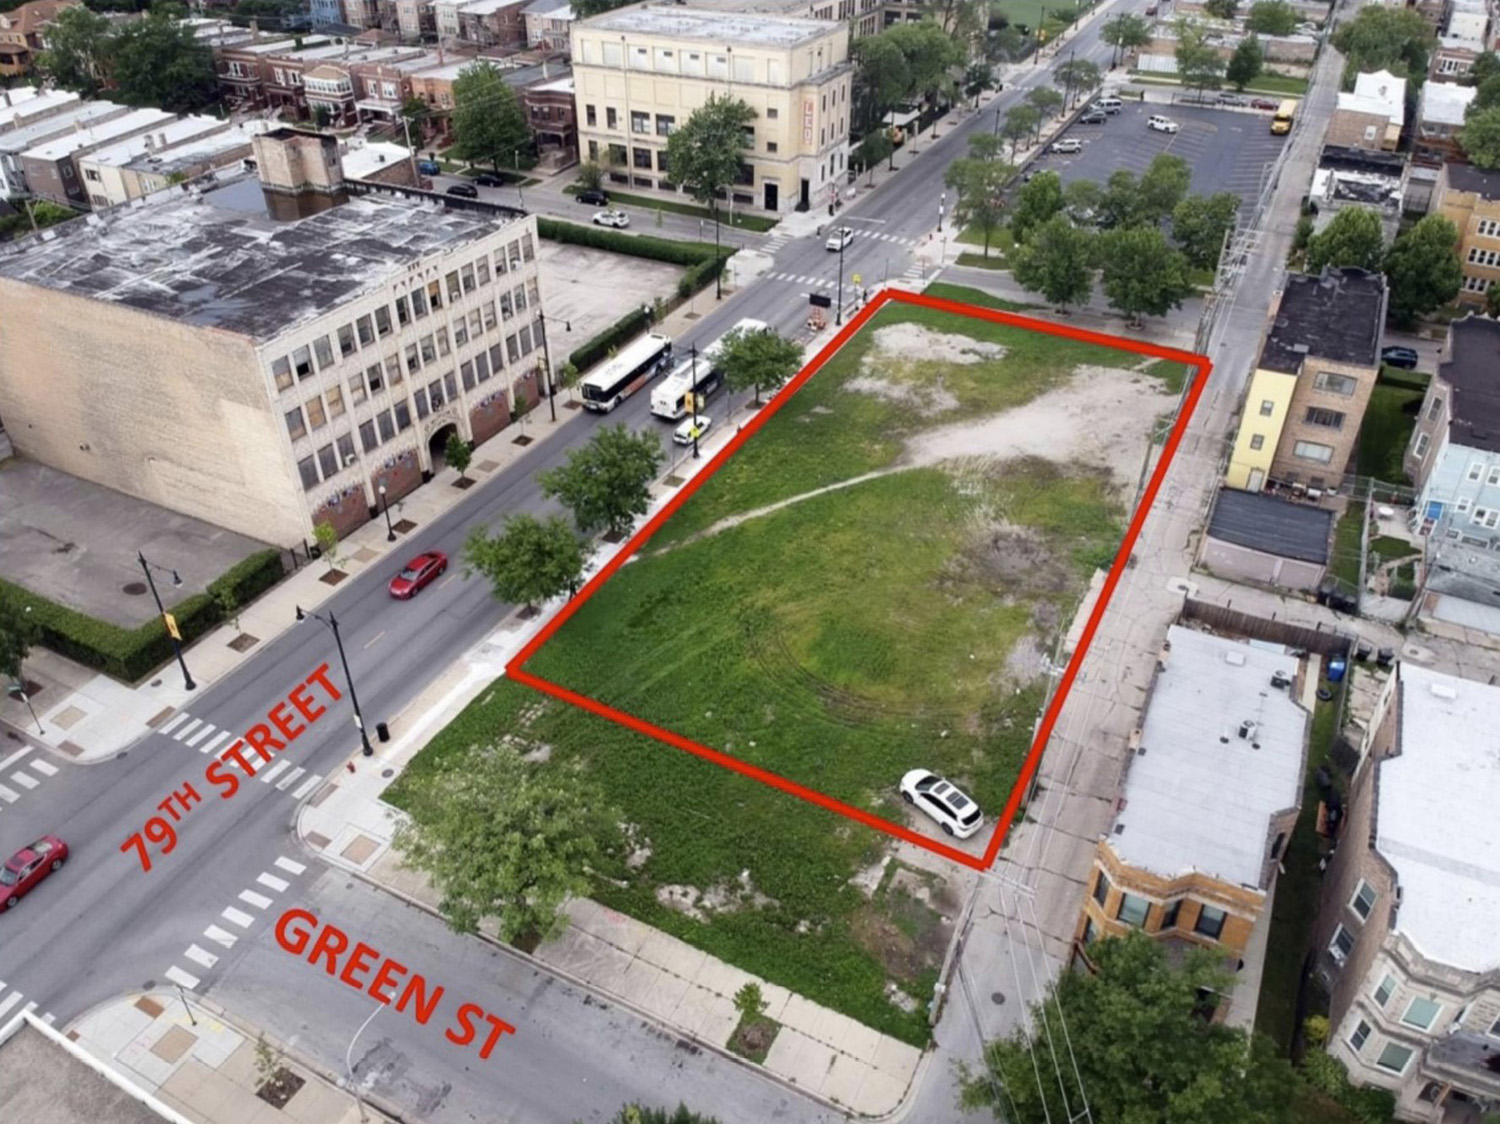 Aerial View of Auburn Gresham RFP Site at 838 W 79th Street. Image by City of Chicago